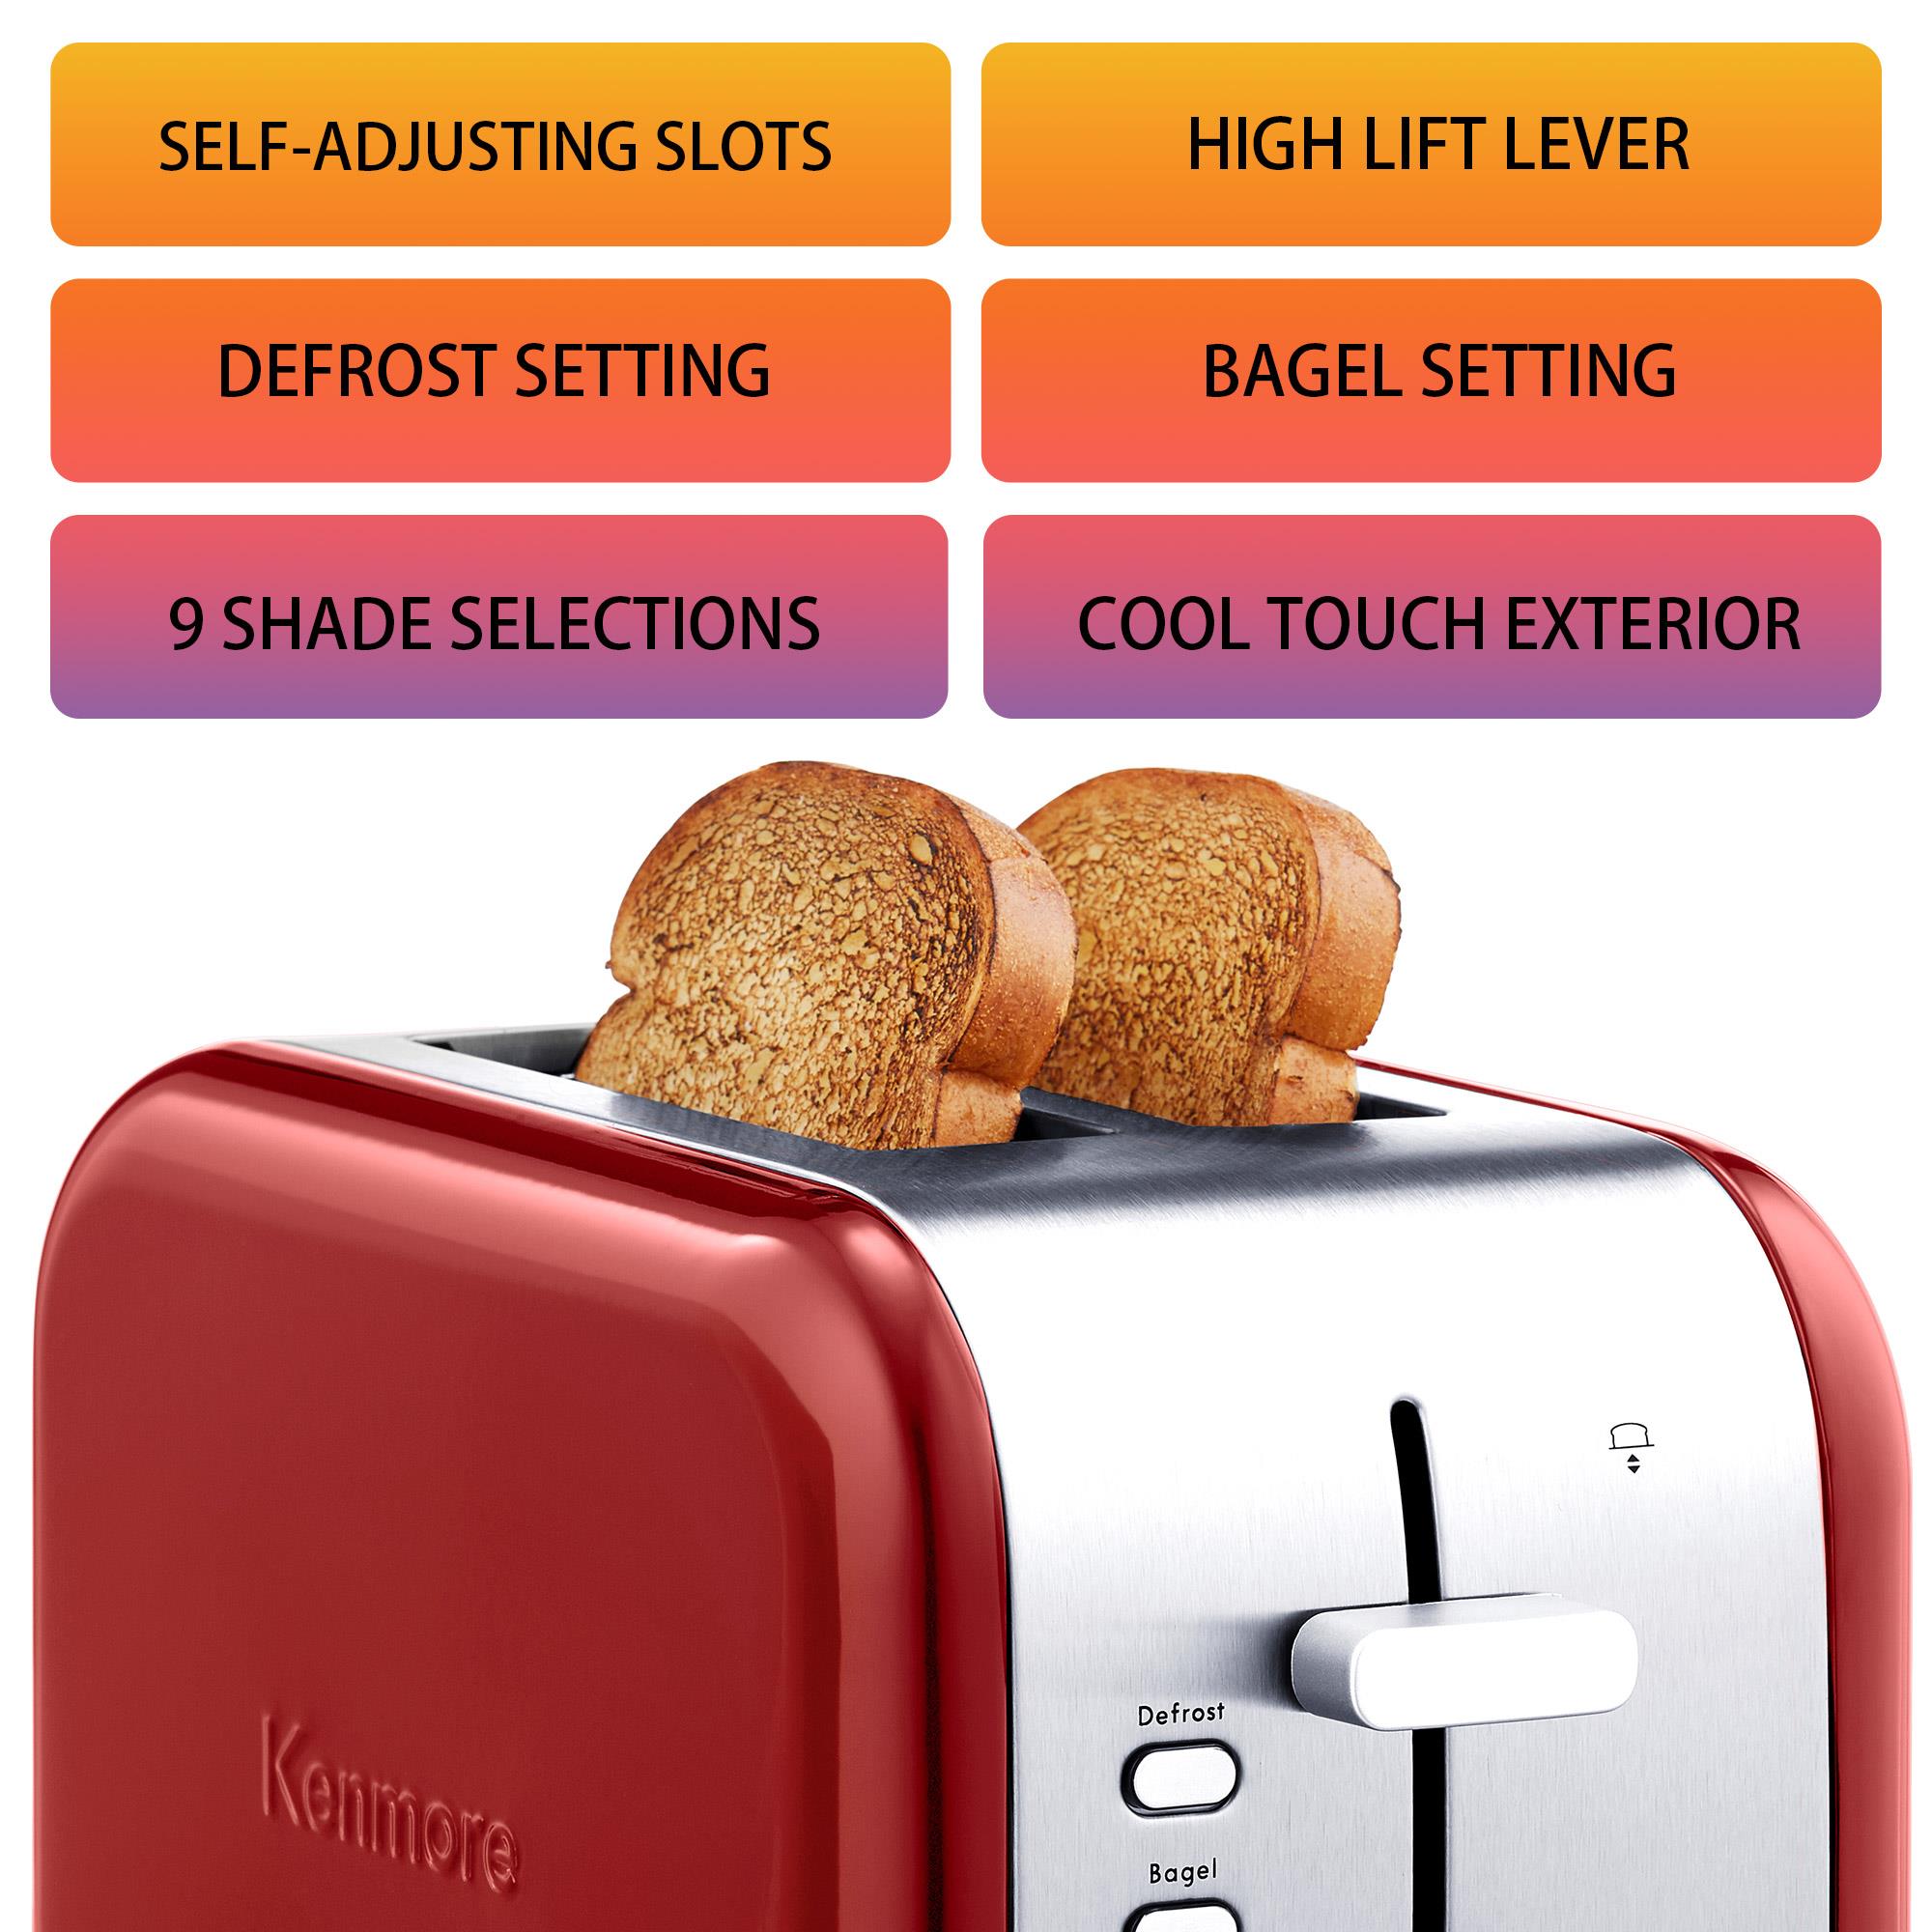  Kenmore Elite 4-Slice Long Slot Toaster Silver, One-Touch  Auto-Lift, Stainless Steel, Adjustable Browning, Defrost, Digital Countdown  Timer, Retractable Cord, Toast, Bagels, Waffles, English Muffins: Home &  Kitchen